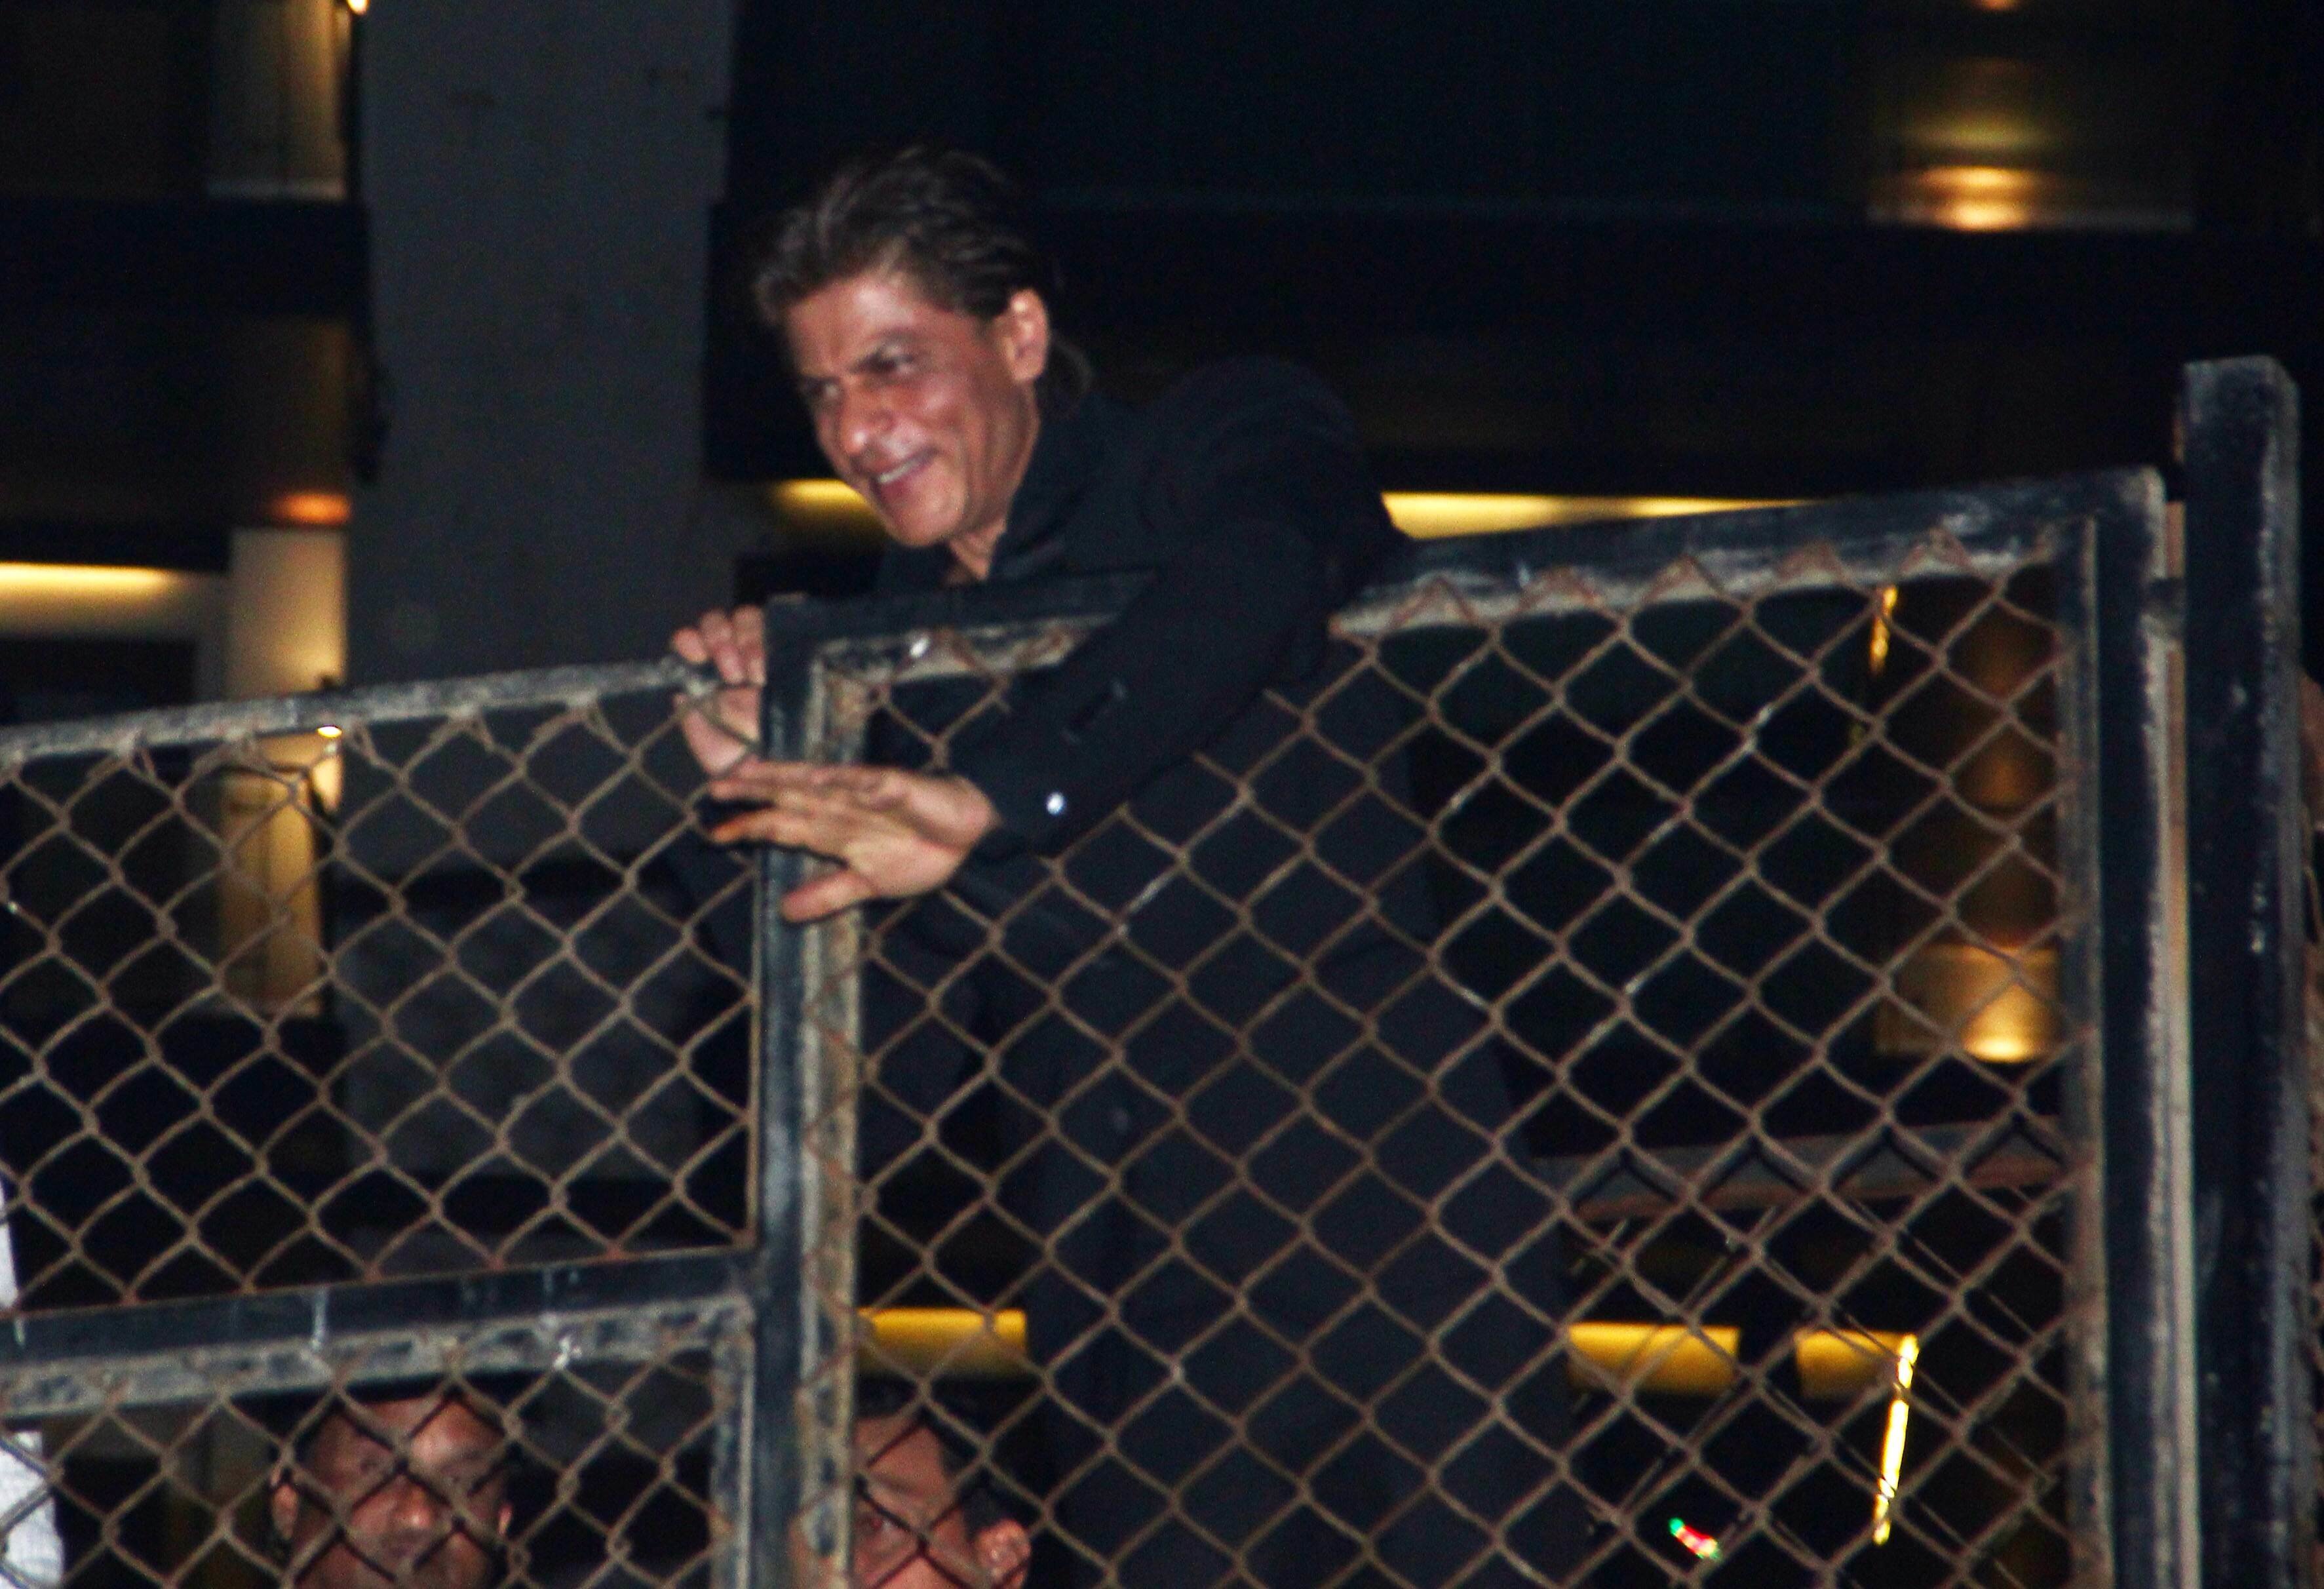 SRK Greets Fans At Midnight,Deepika At Siddhivinayak| Spotted